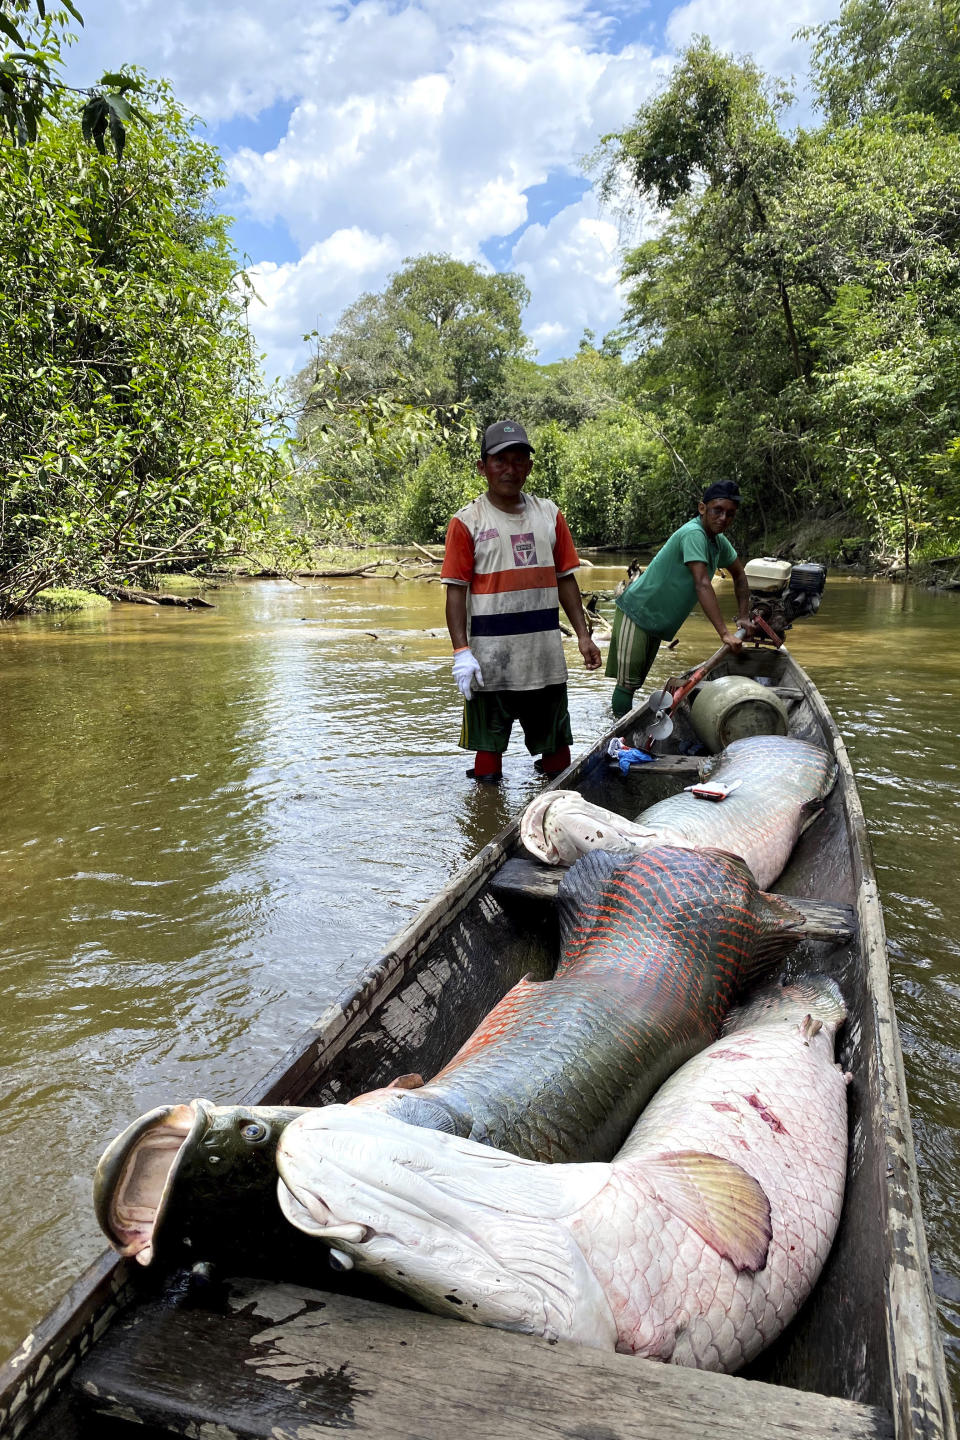 Members of the Deni Indigenous people work during the arapaima fishing season in the Jurua river basin in the Brazilian Amazon, on Sept. 15, 2021. One out of five people in the world depends on wild species for food and income, according to a new UN-backed report. Climate change, pollution and overexploitation, however, have put a million species of plants and animals at risk of extinction. (AP Photo/Fabiano Maisonnave)